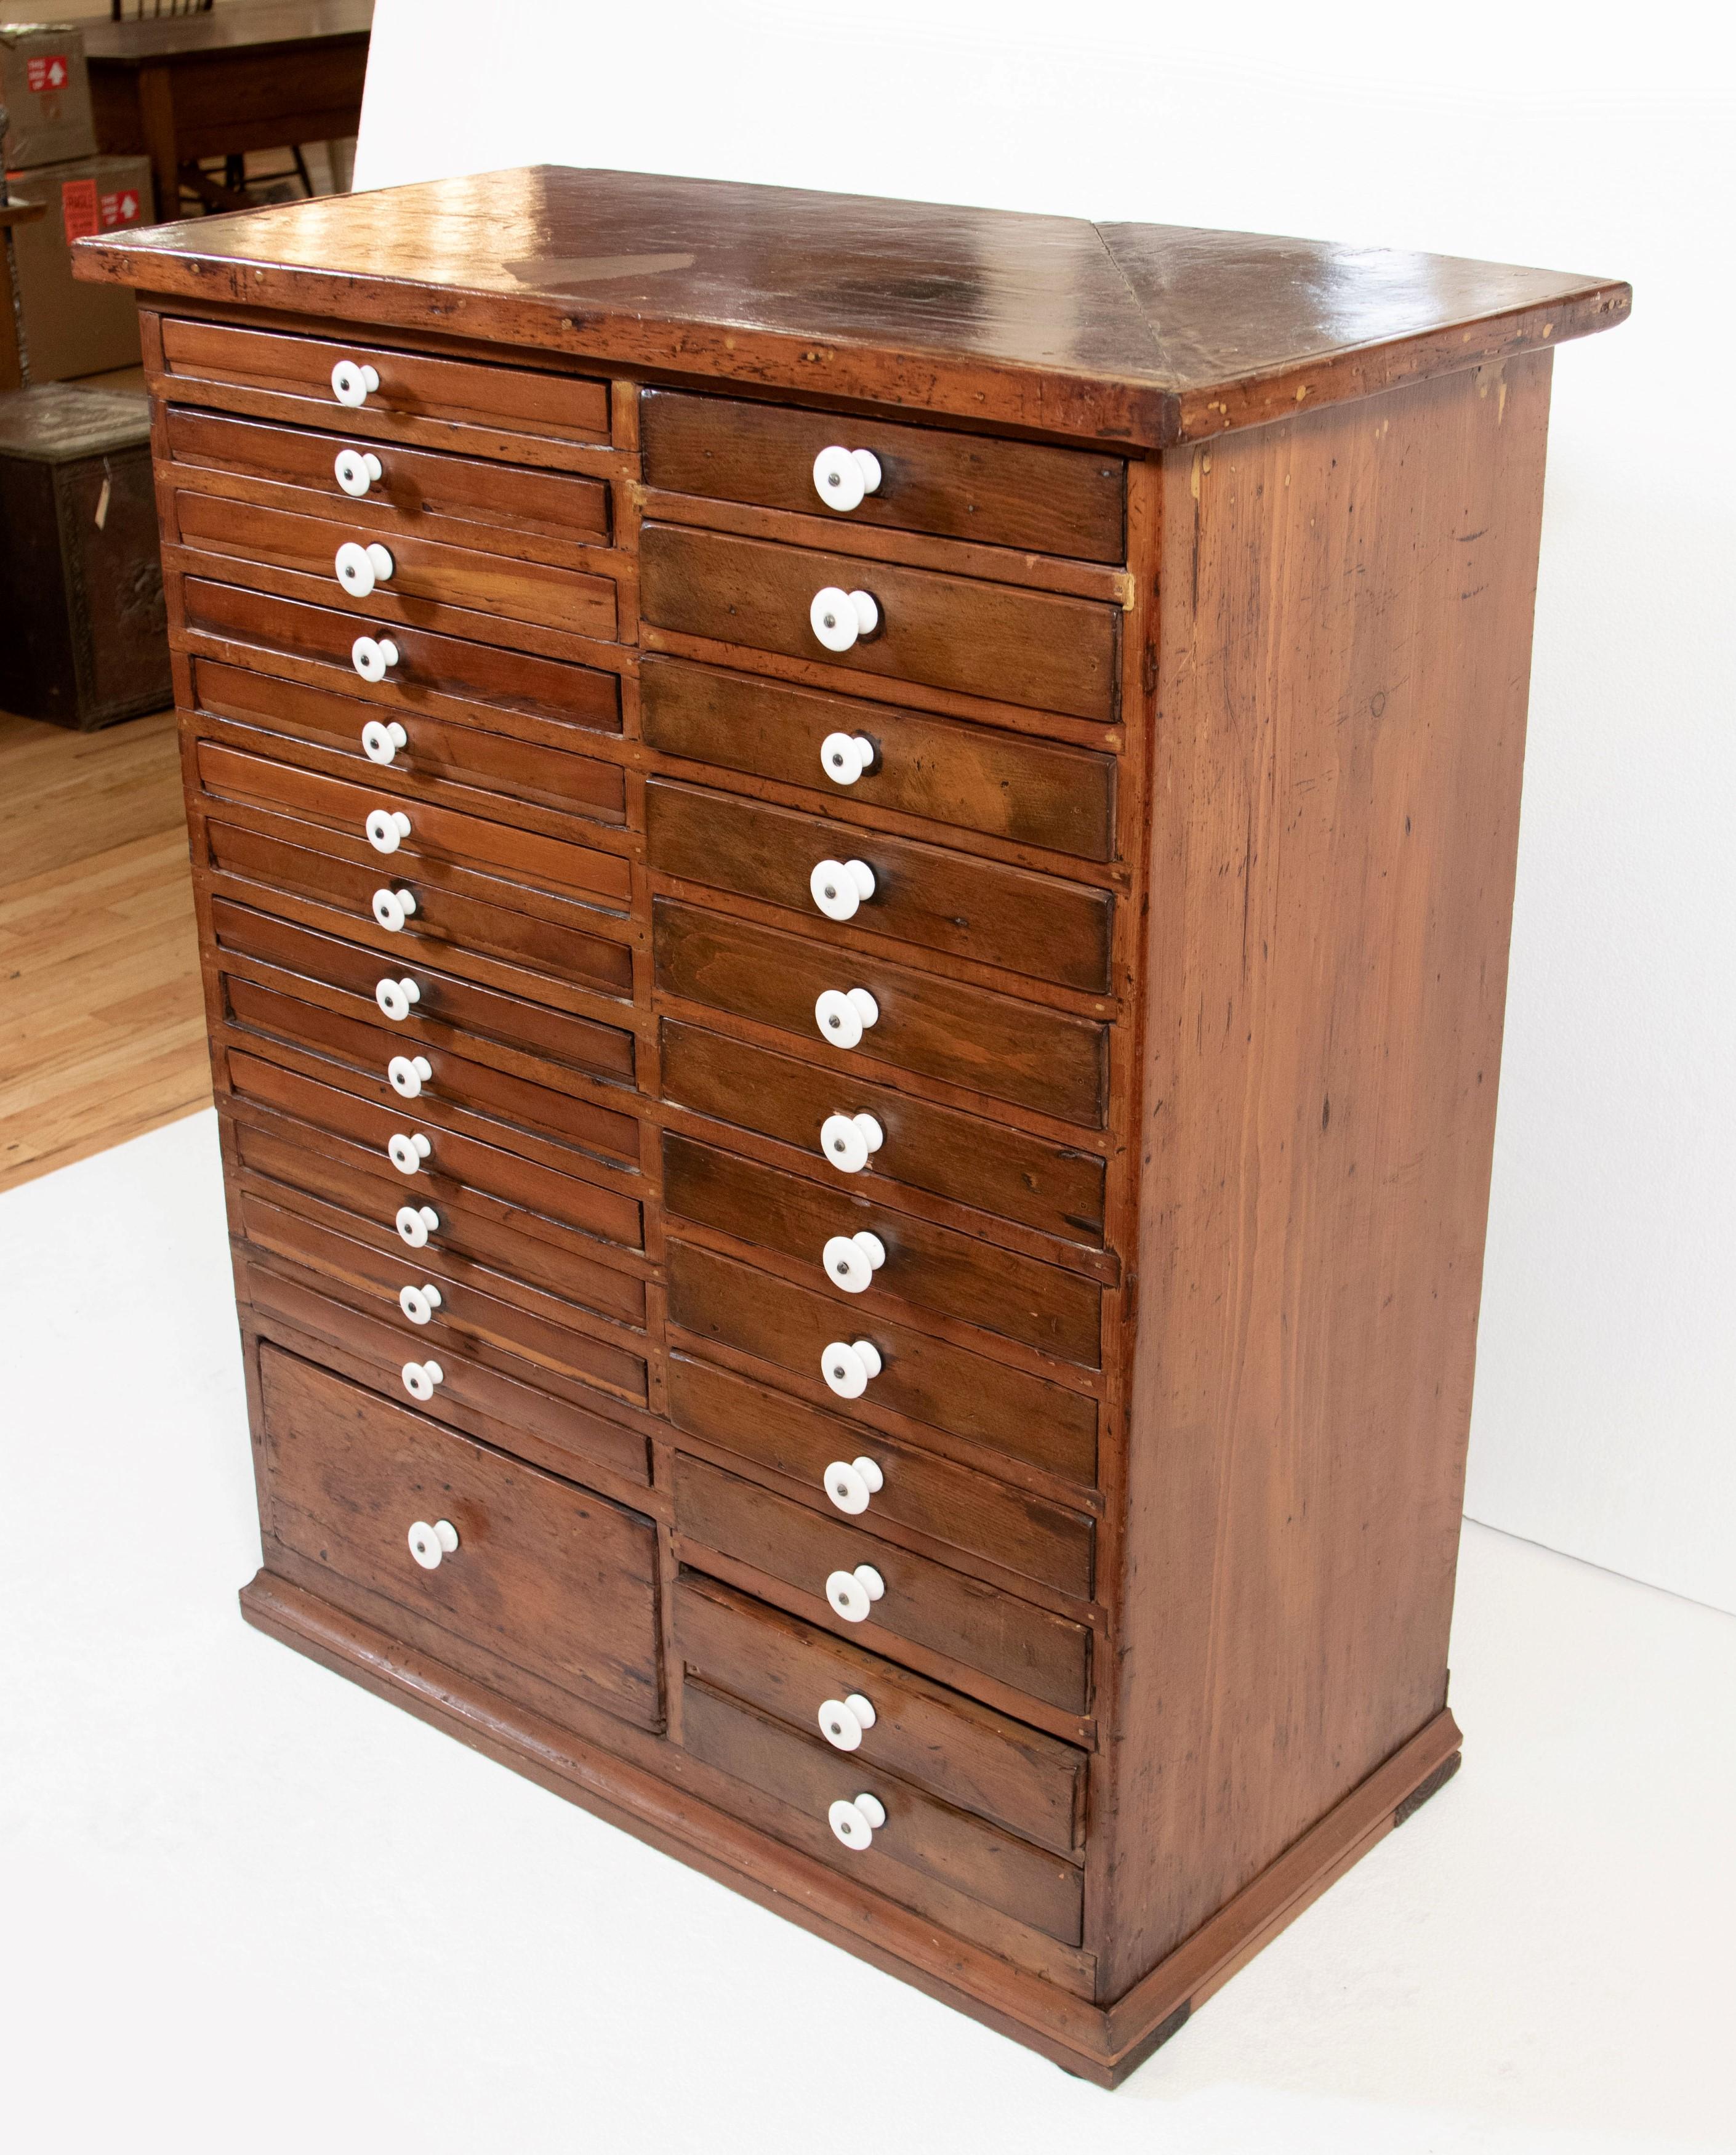 Antique Early 20th Century wood dental cabinet with 26 drawers and white ceramic knobs. Good condition with appropriate wear from age. One available. Please note, this item is located in one of our NYC locations.